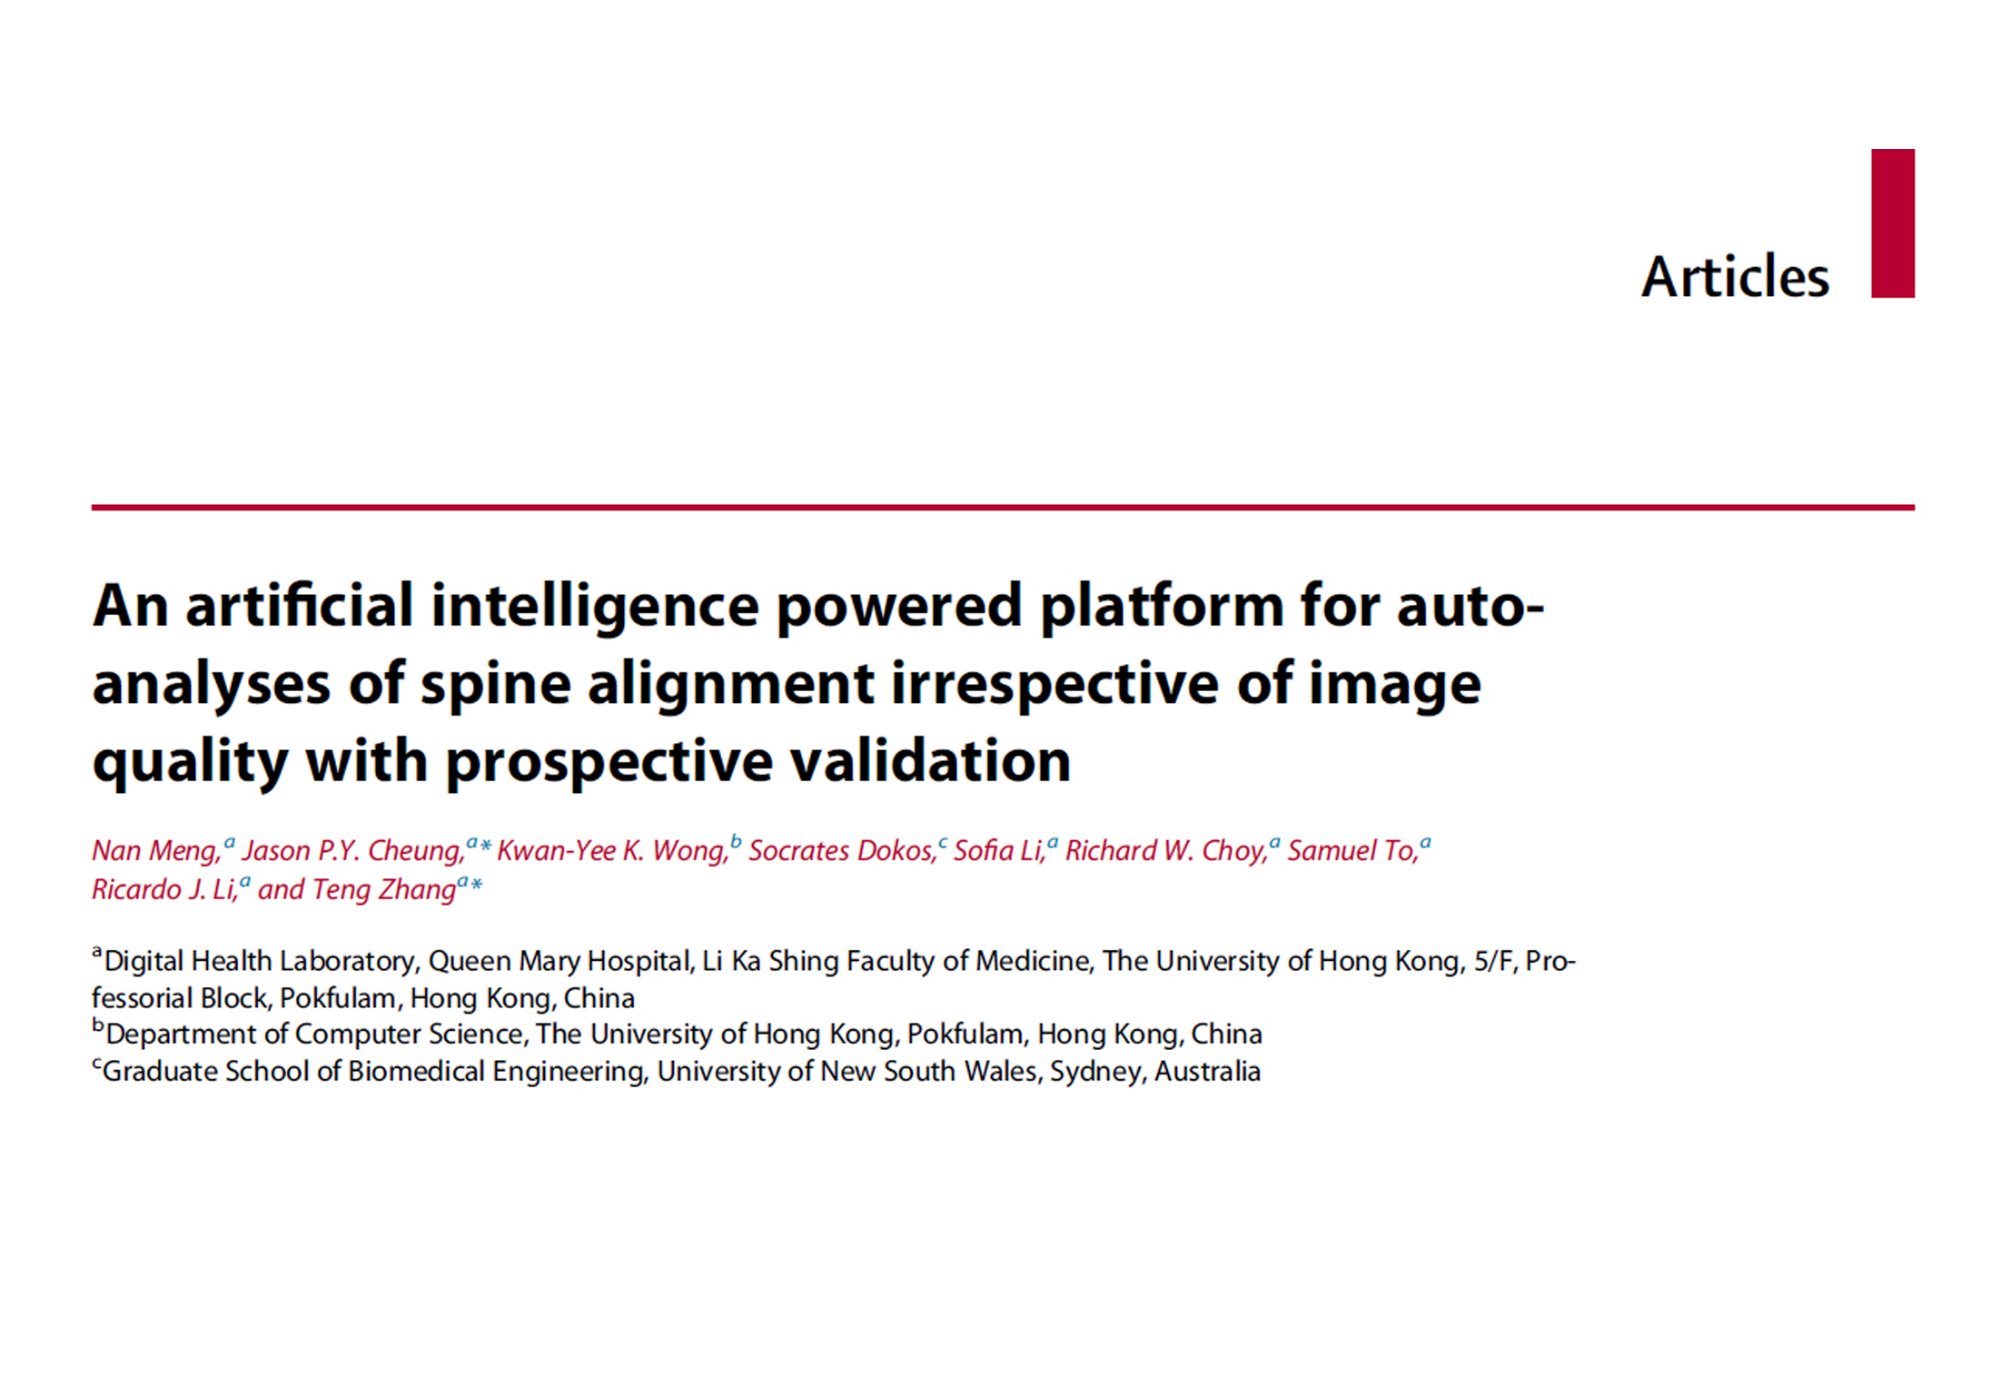 An artificial intelligence powered platform for autoanalyses of spine alignment irrespective of image quality with prospective validation